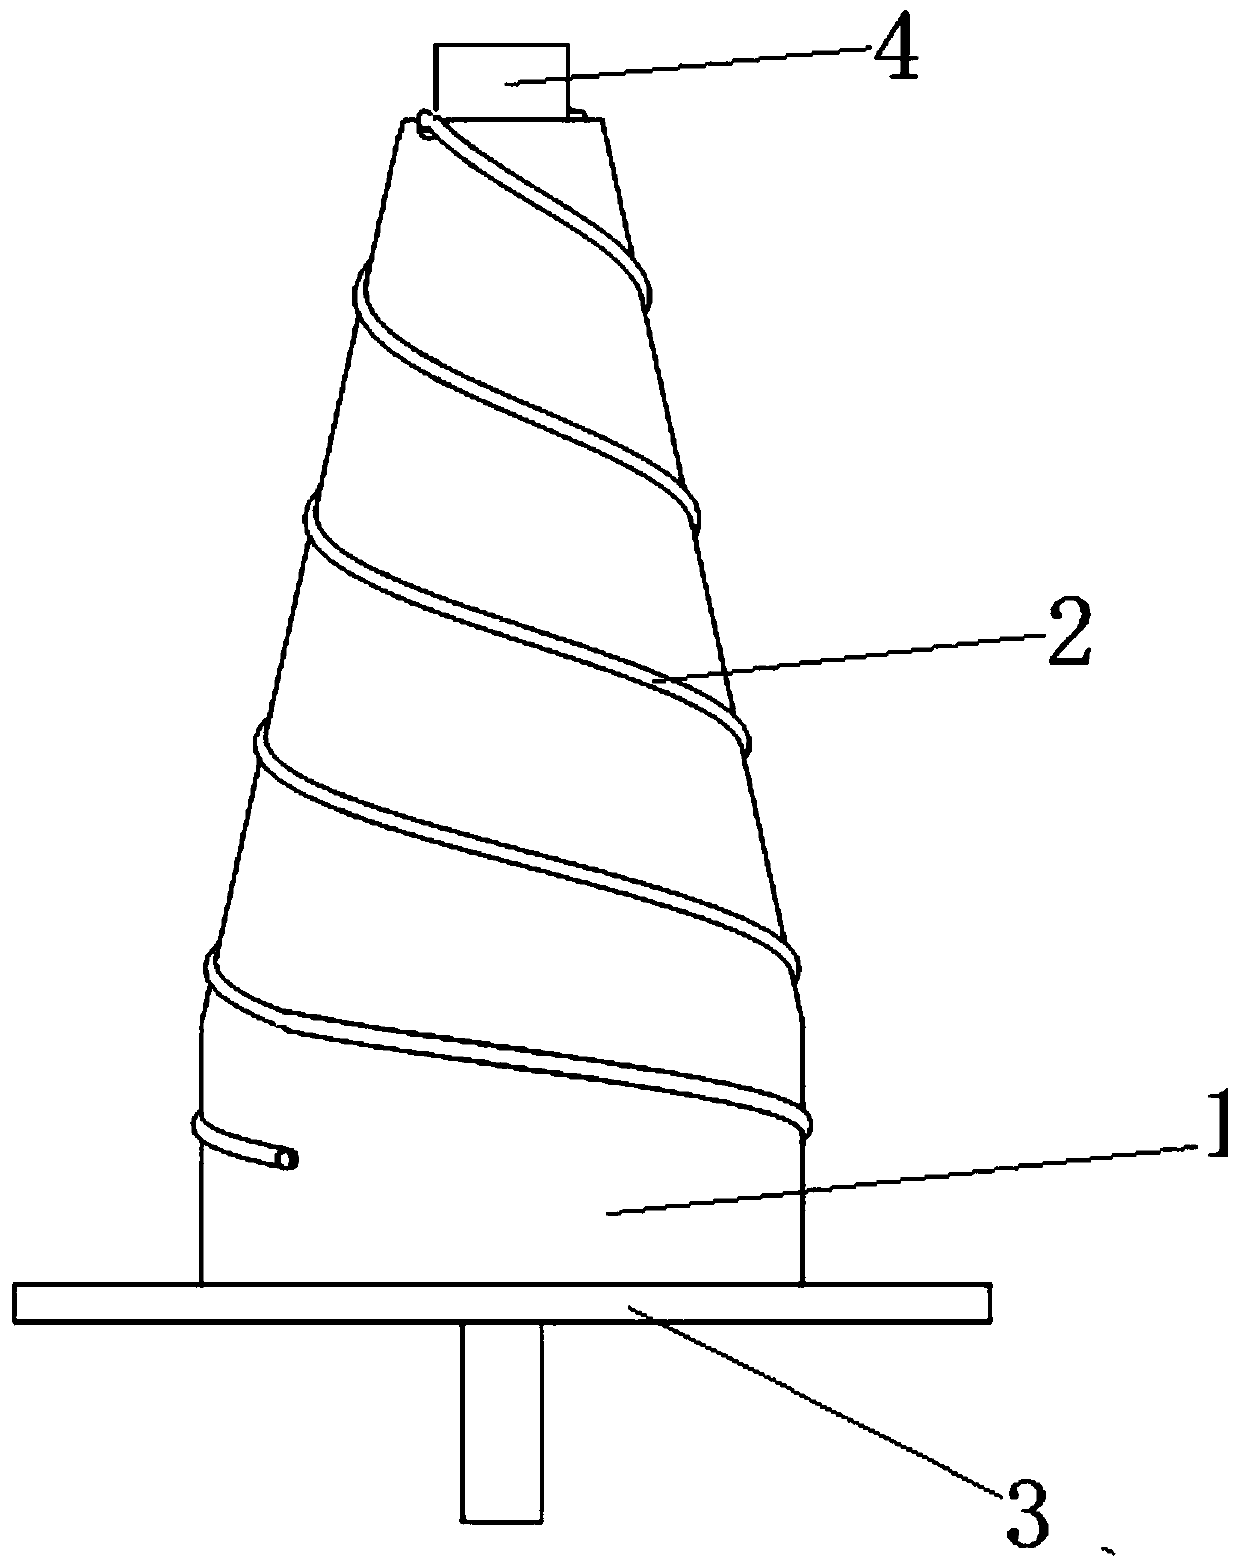 Pitch-variable spiral antenna